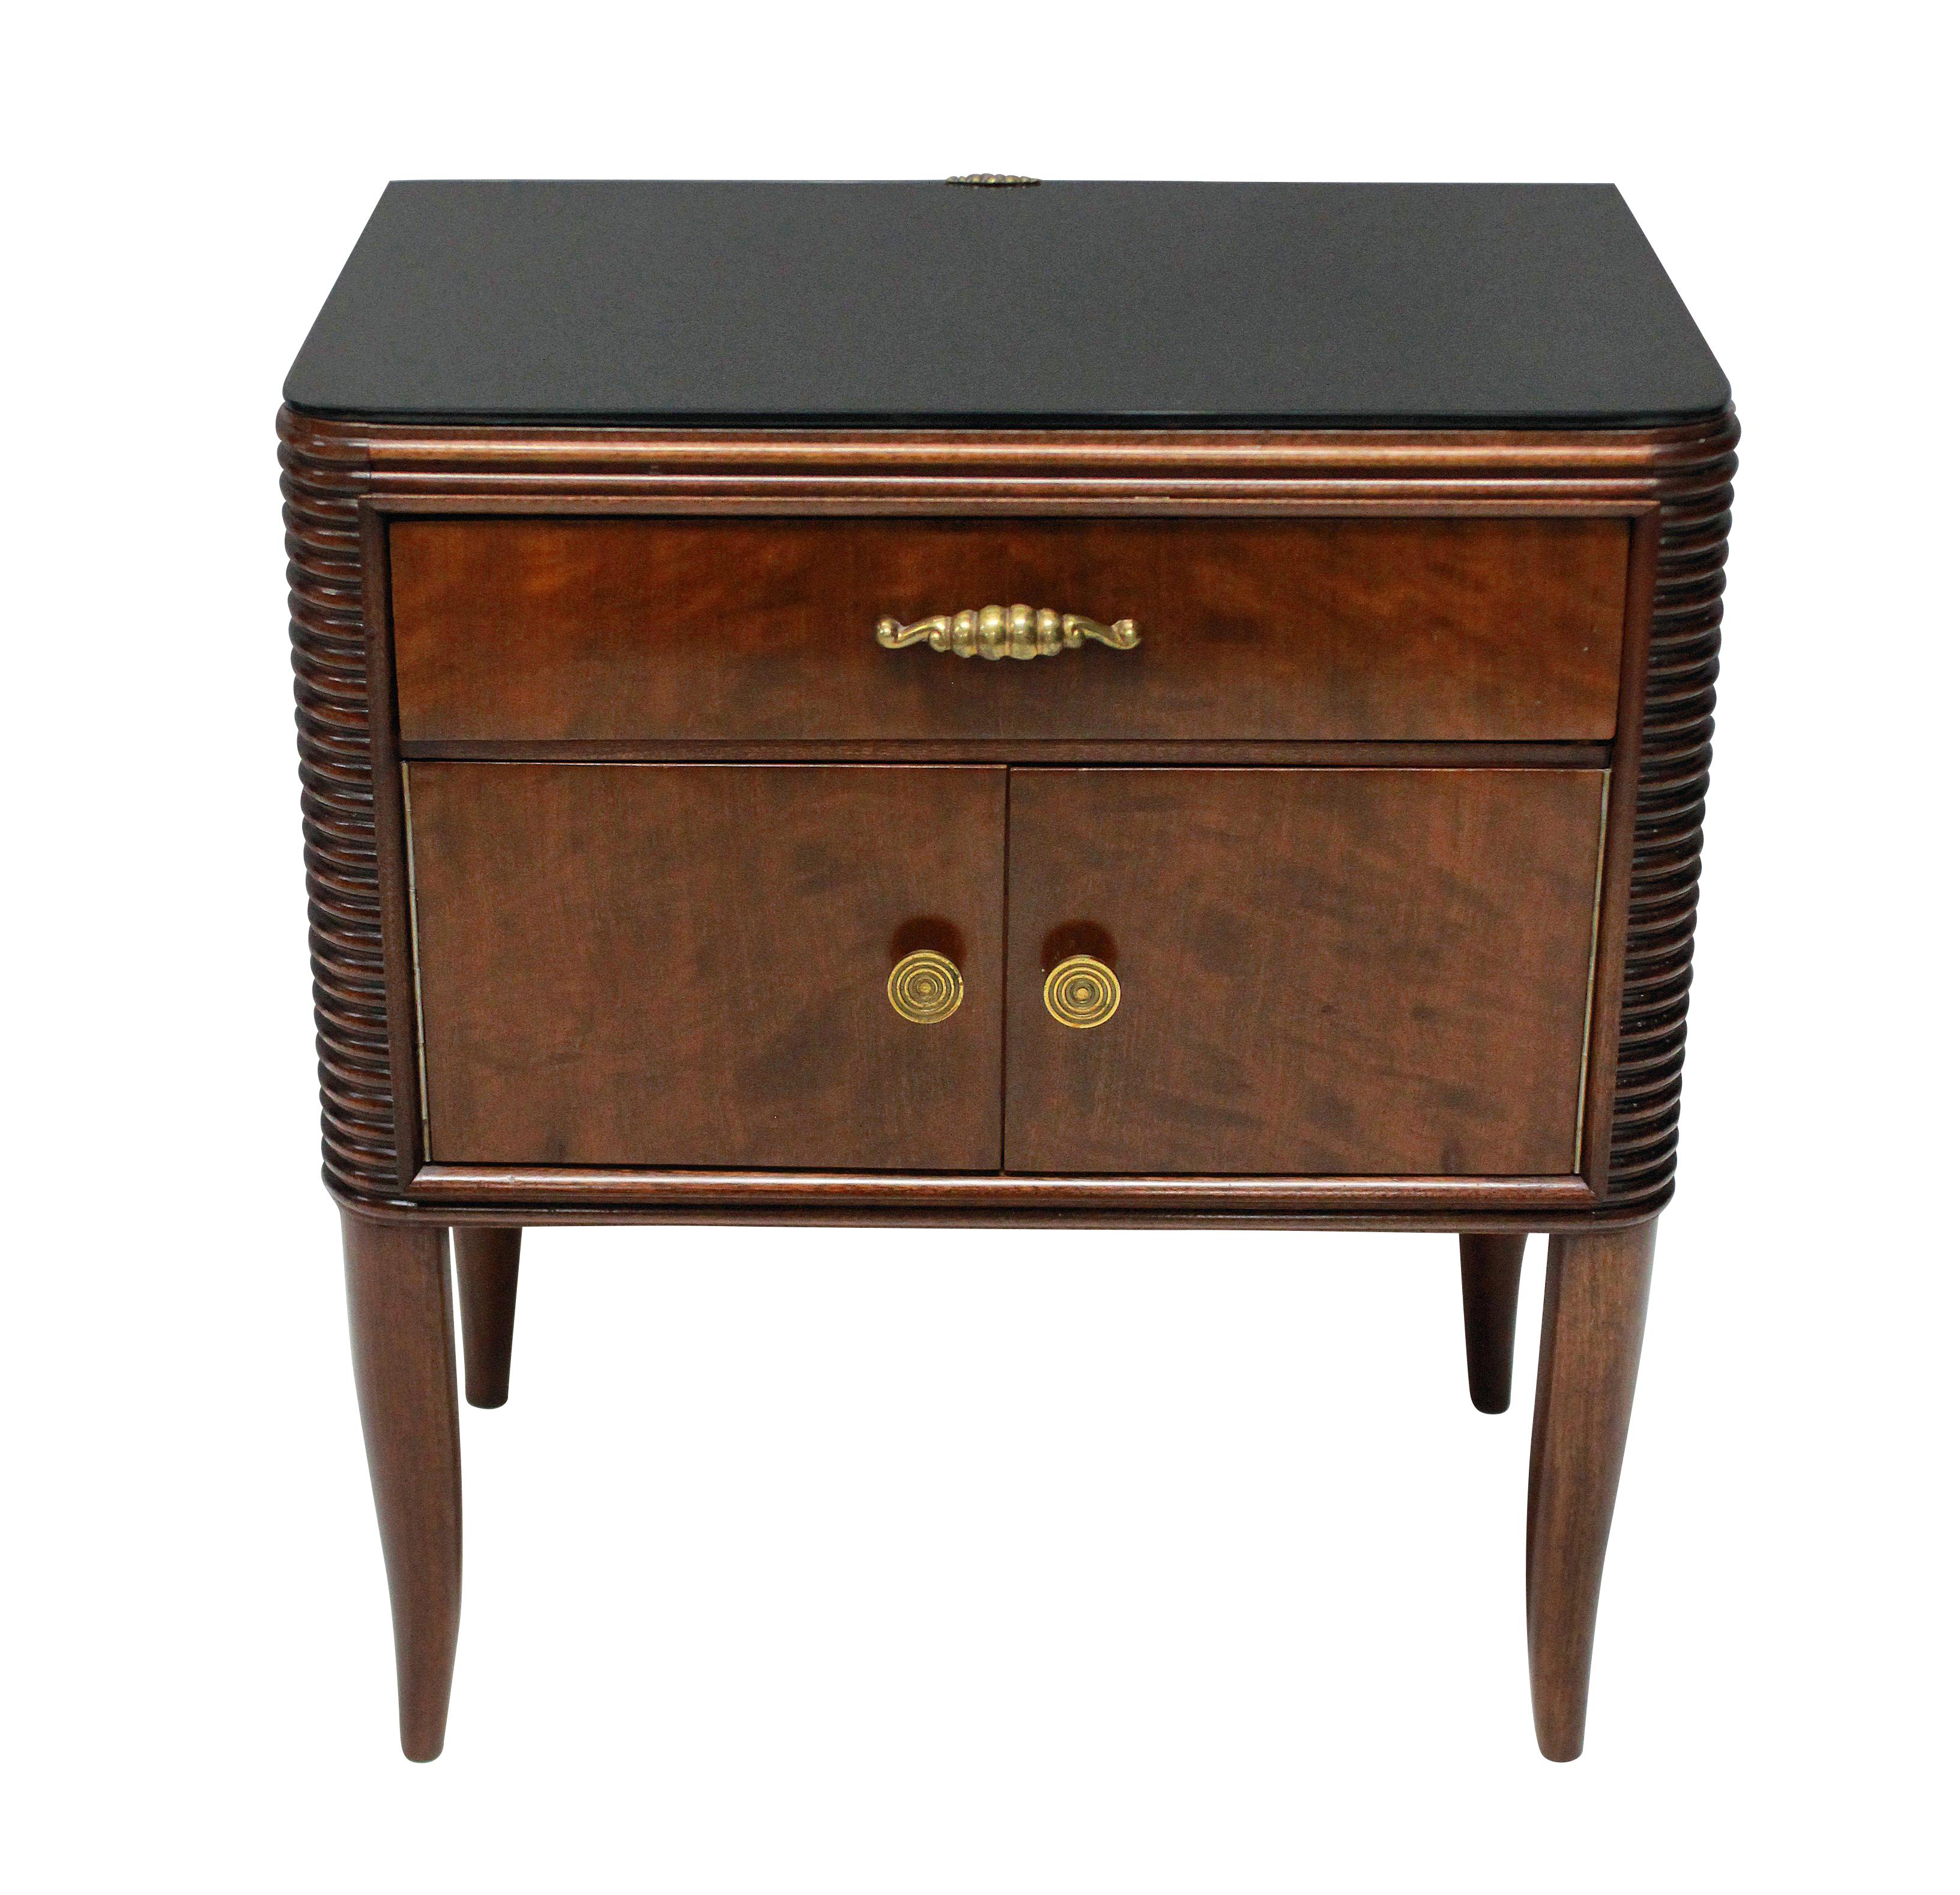 A pair of Italian night stands by Paolo Buffa in flame mahogany, comprising a cupboard and drawer above. On fine tapering legs, with black glass tops and nice detailing in the brass work.